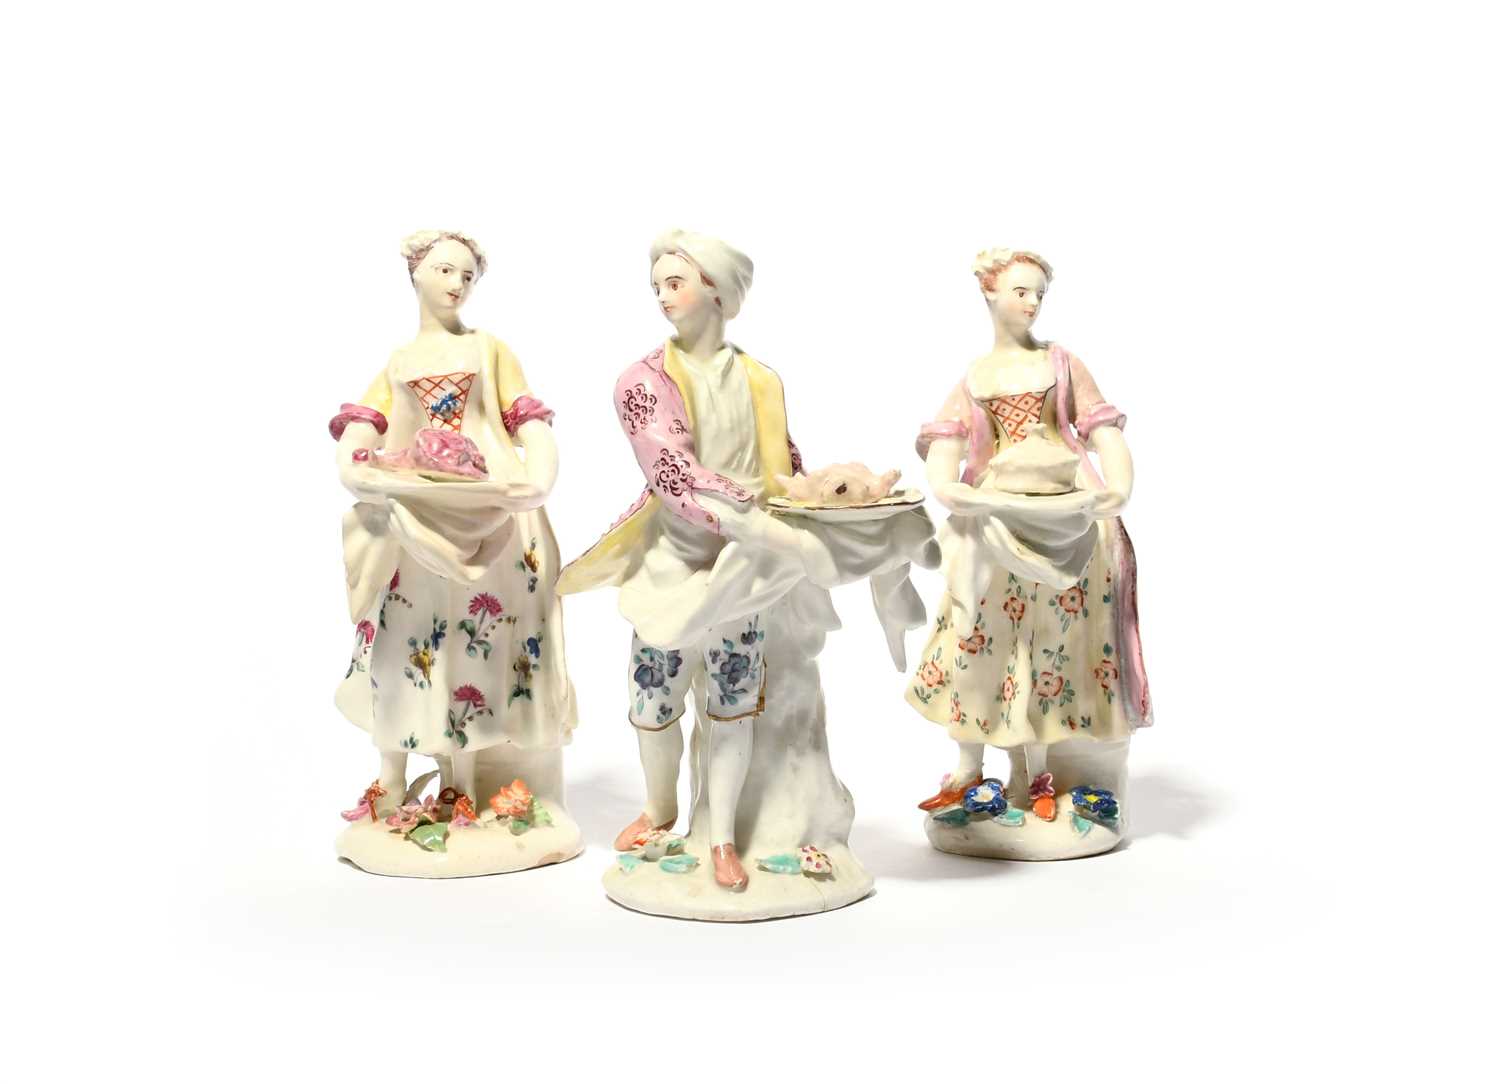 A Bow figure of the Poultry Chef and two Bow figures of female cooks, c.1755, the former holding a